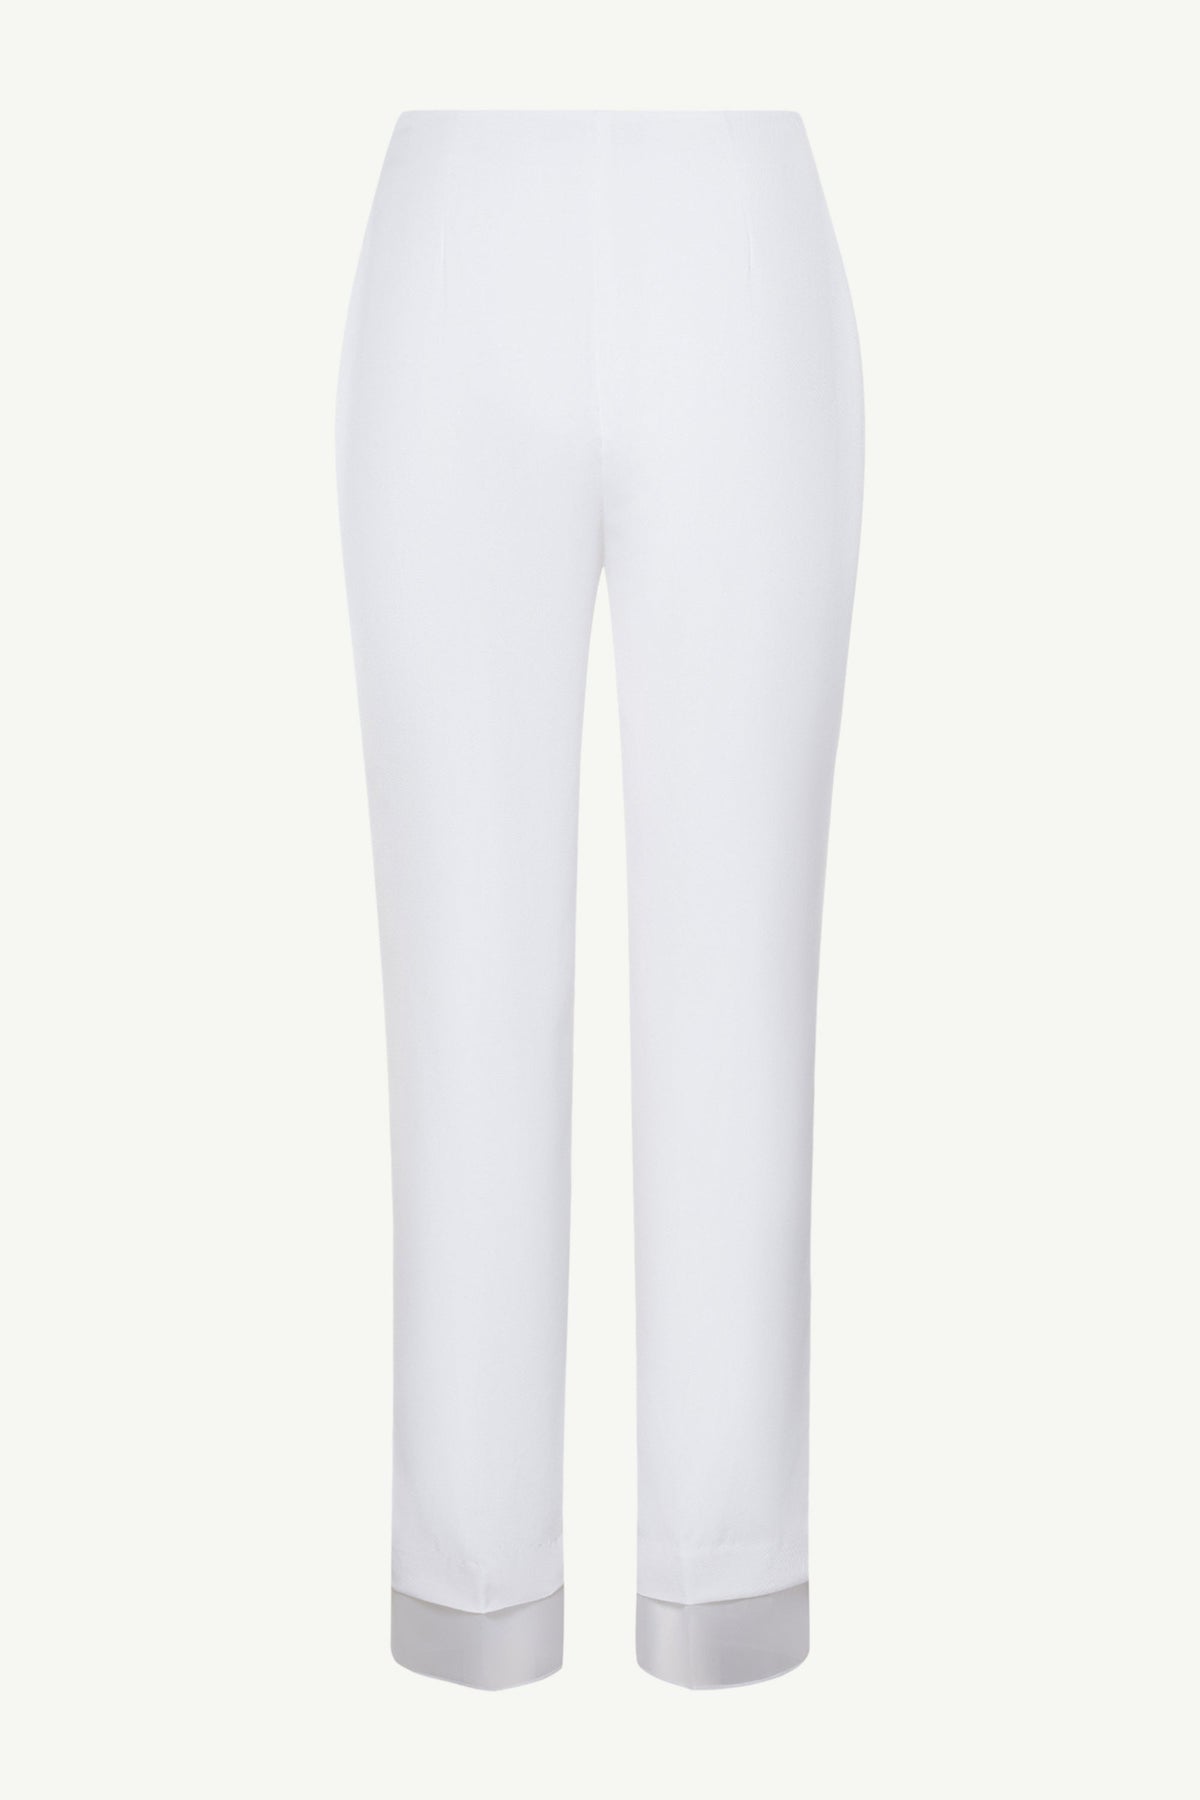 Rayan Organza Trim Trousers - White Clothing epschoolboard 